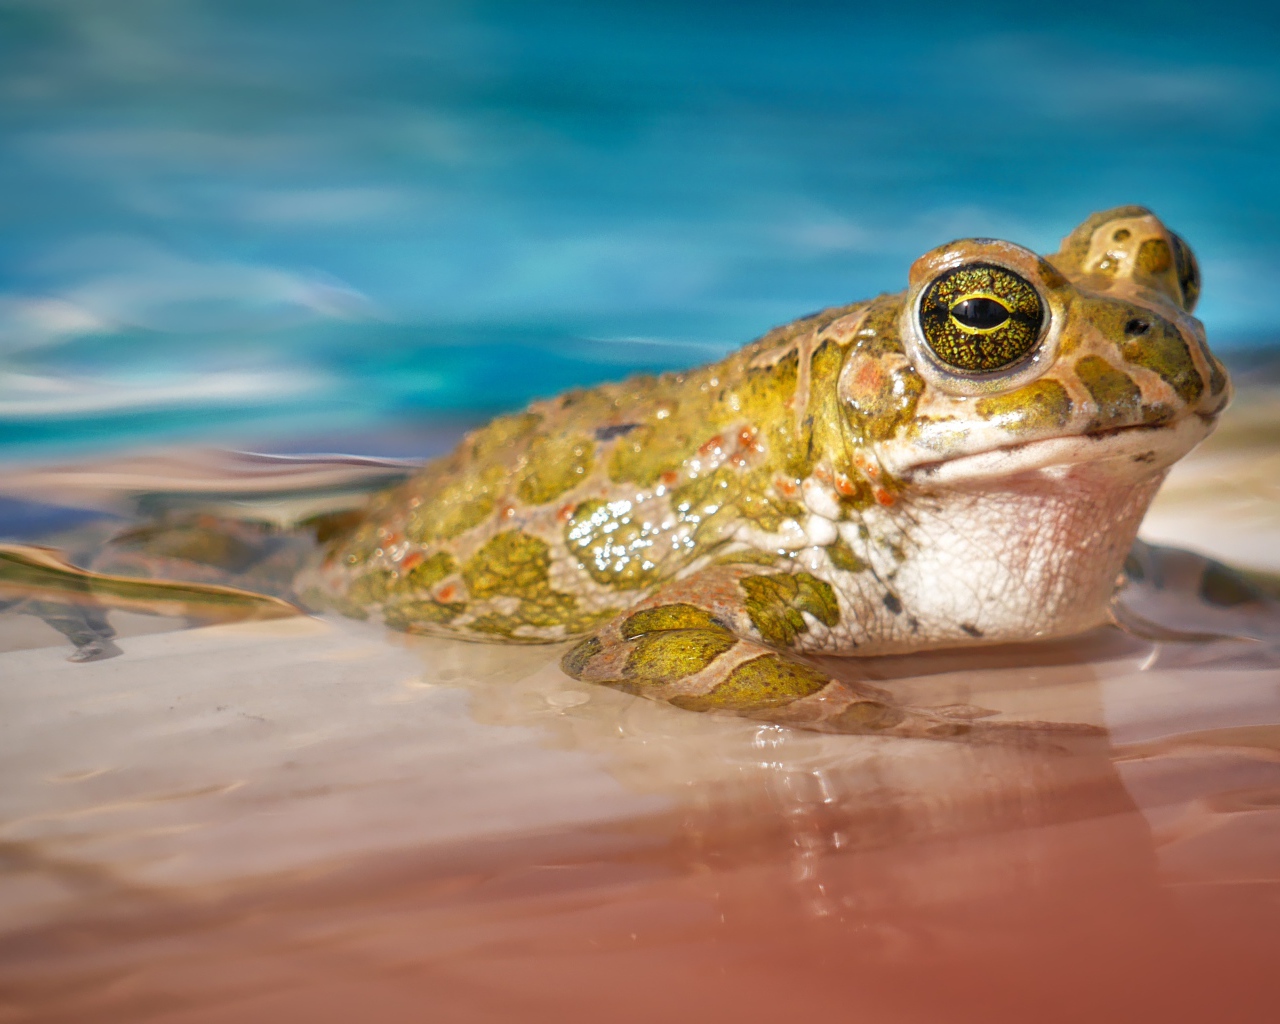 Green toad sitting in blue water